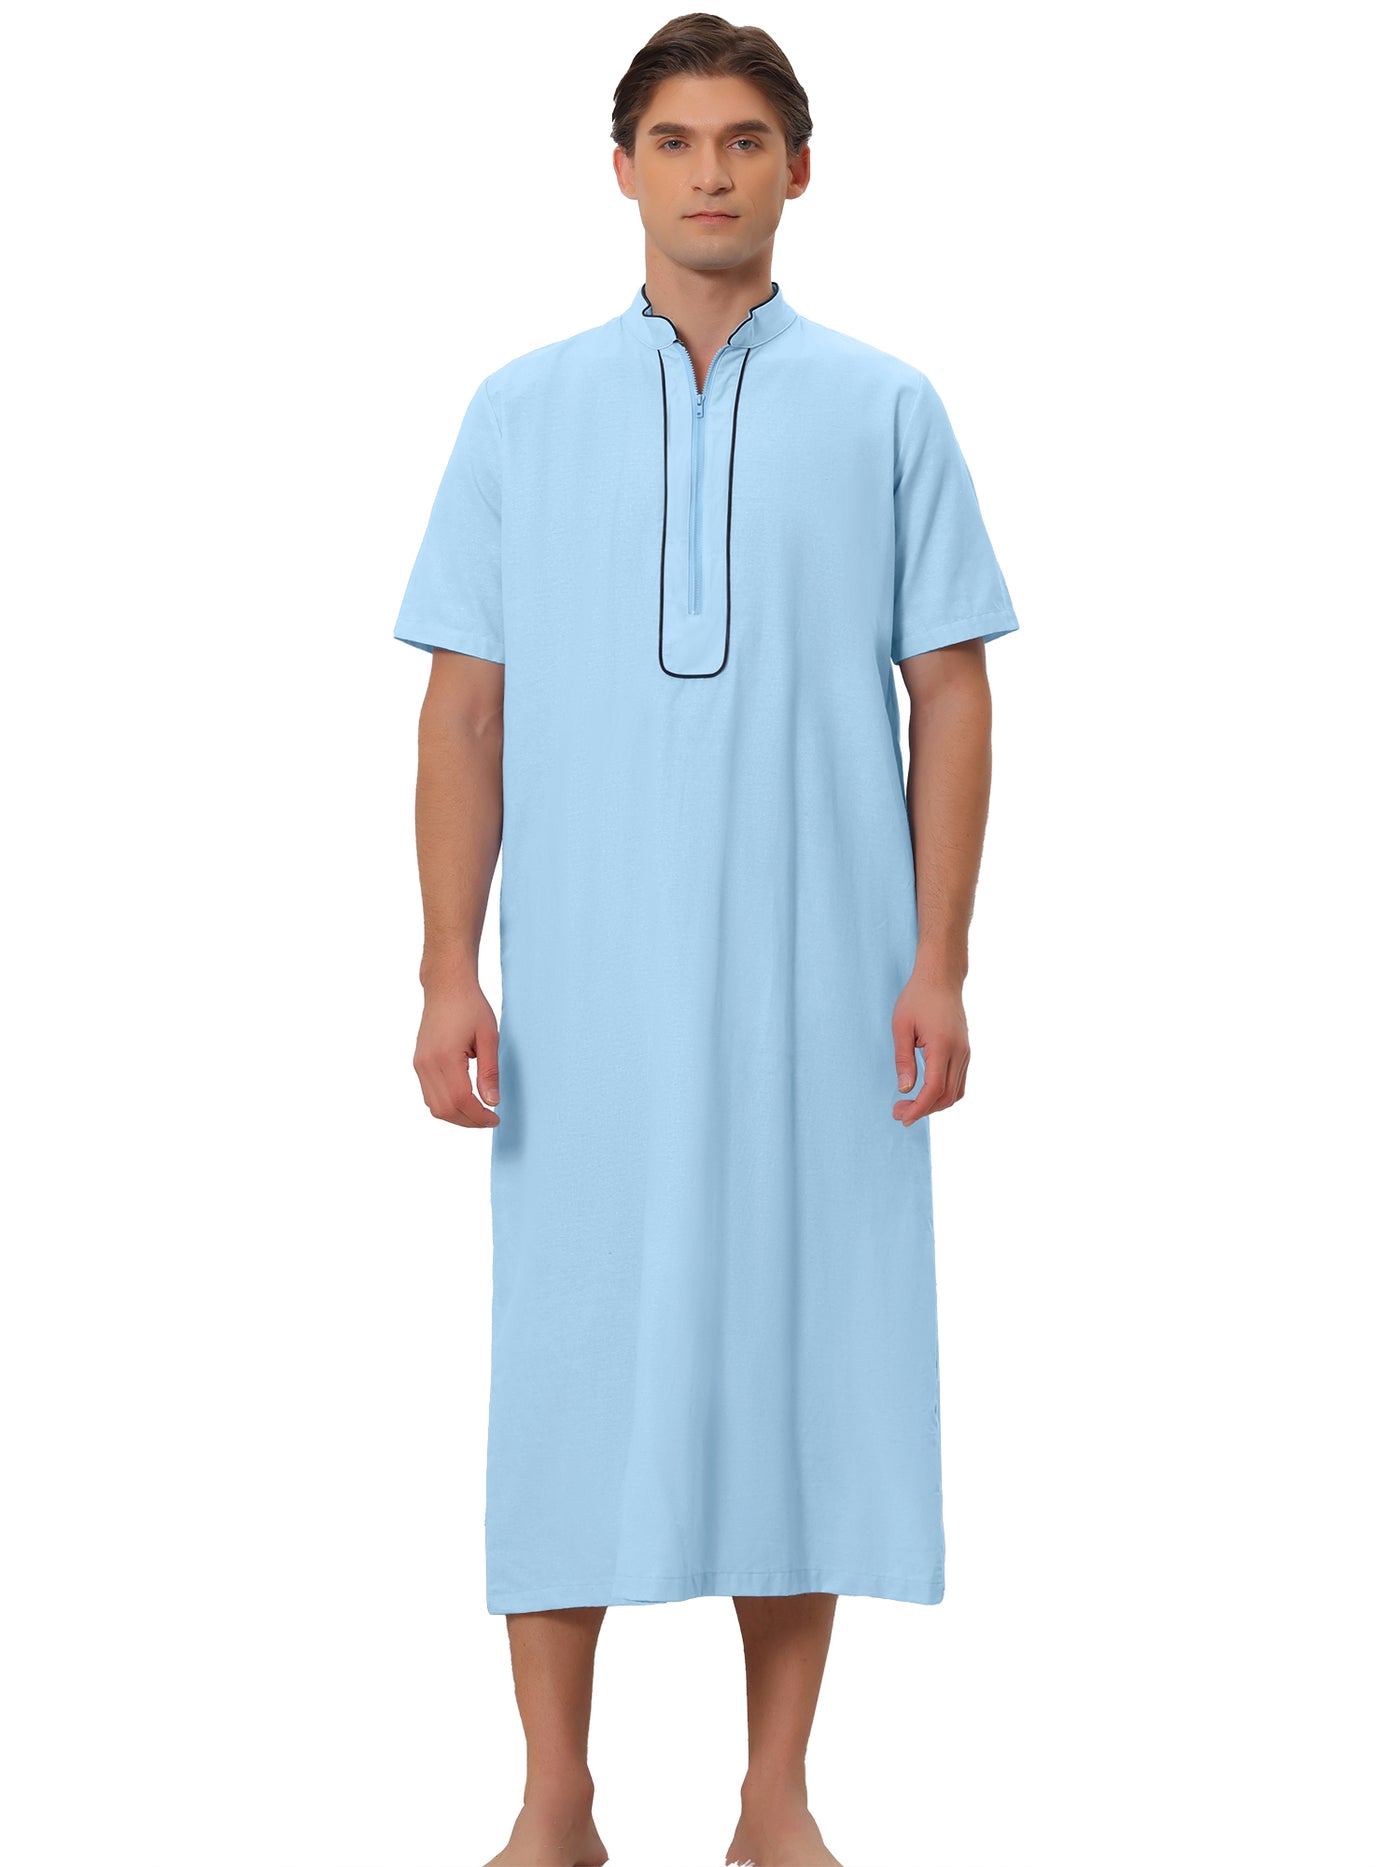 Bublédon Long Nightgown for Men's Loose Fit Short Sleeves Stand Collar Zipper Nightshirts